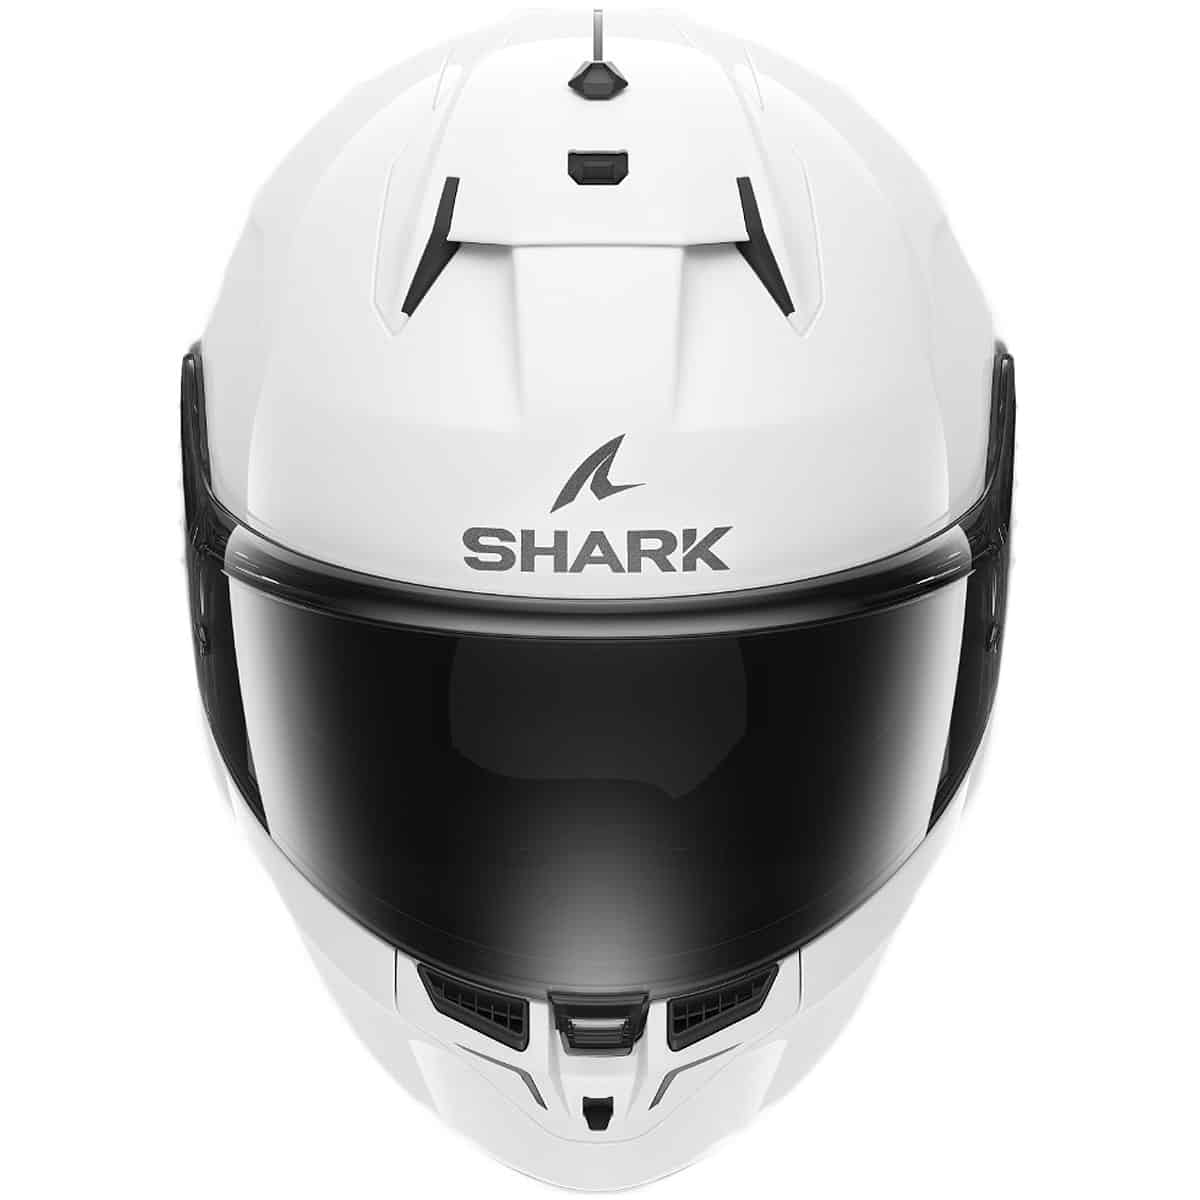 The Shark D-Skwal 3 full face helmet is the perfect combination of style, stability and safety. Its aggressive design with aerodynamic spoilers gives you an unbeatable look as you take to the streets. - front